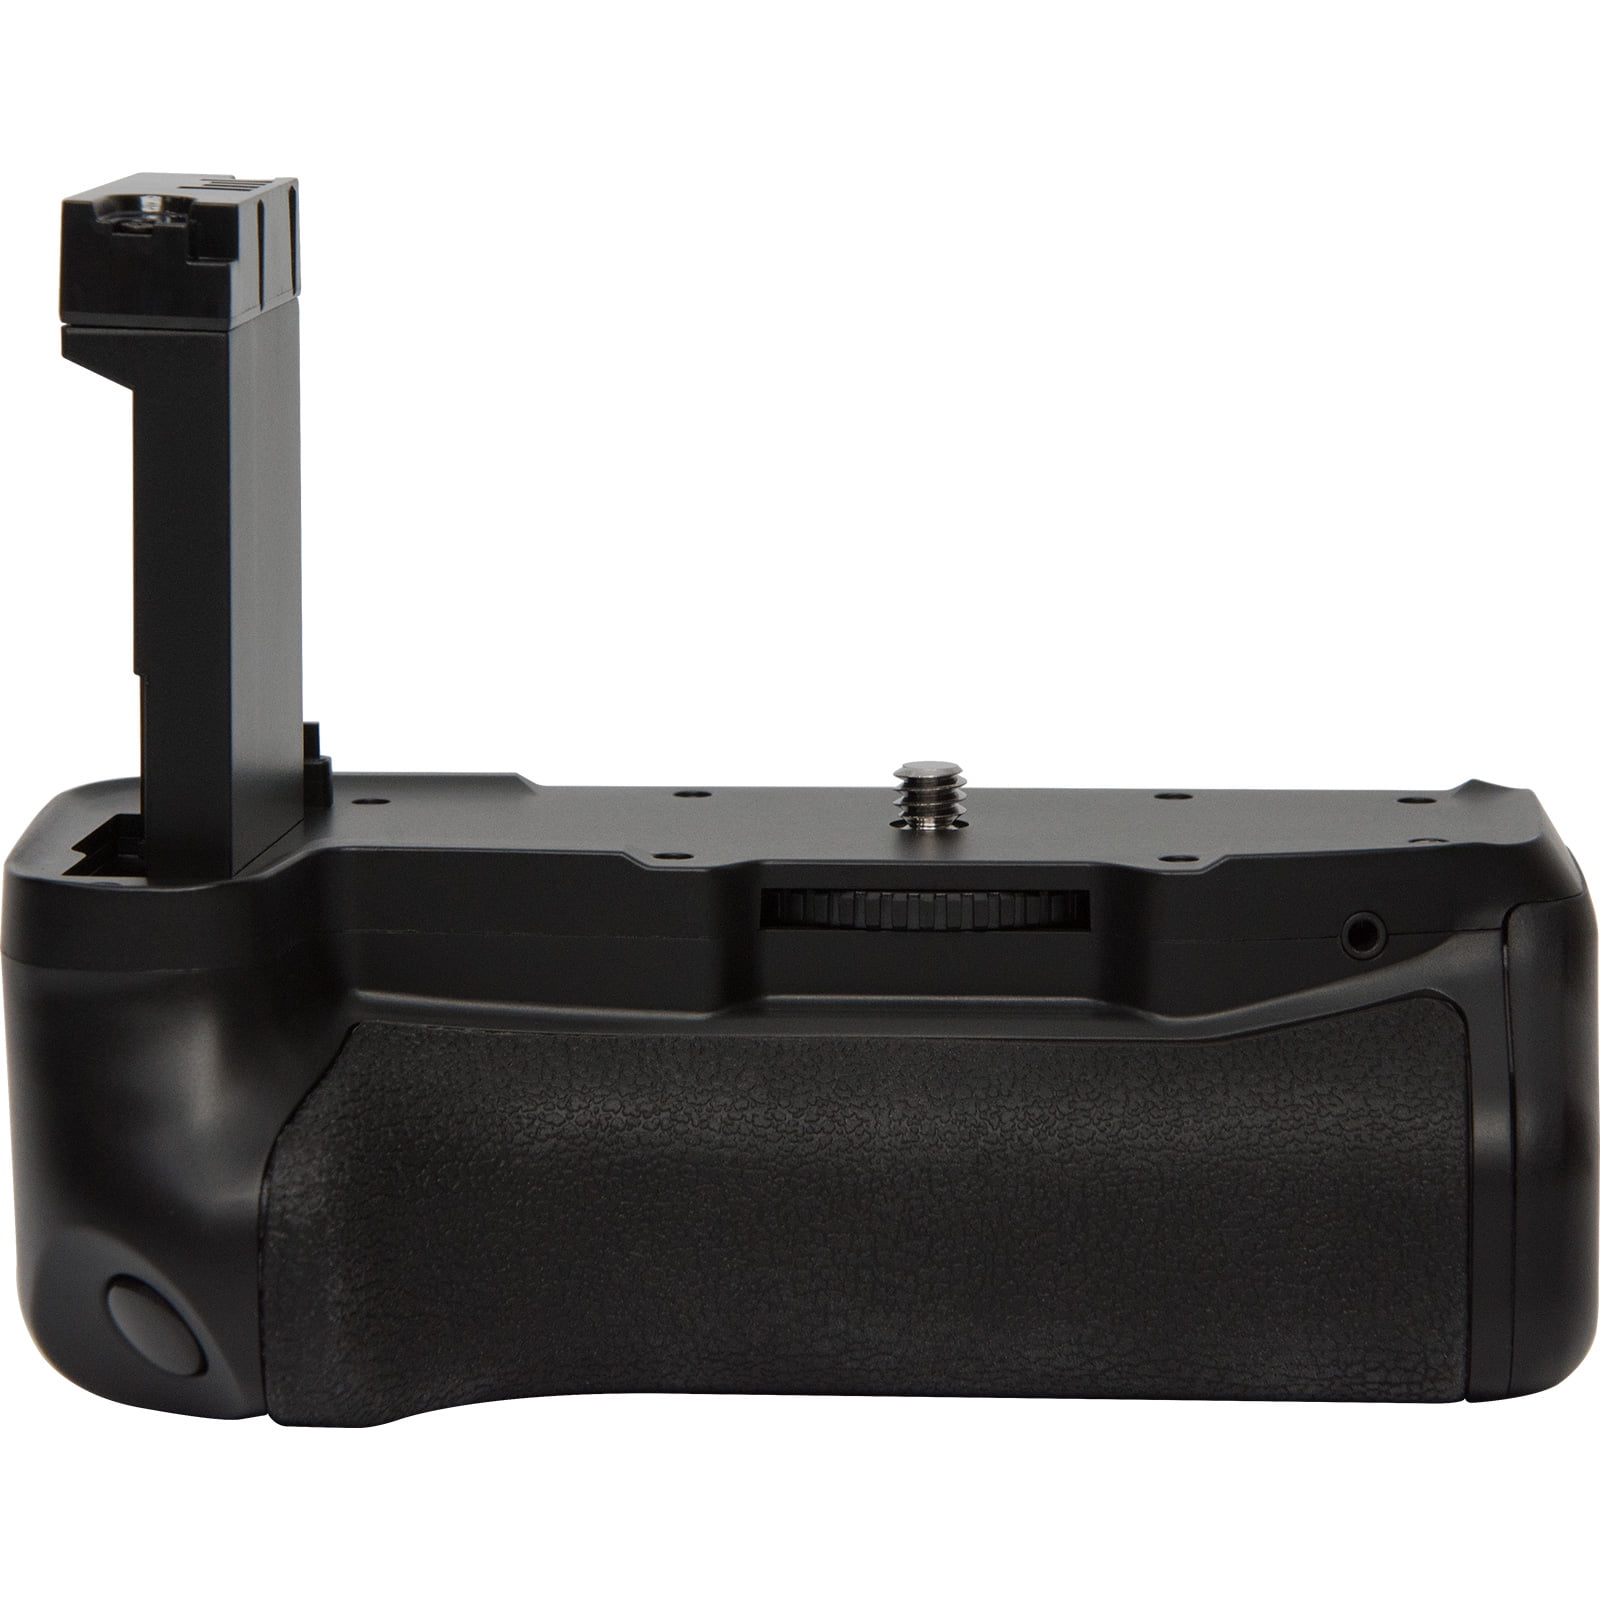 Battery Grip Kit for Canon Rebel T7i and EOS 77D DSLR Camera